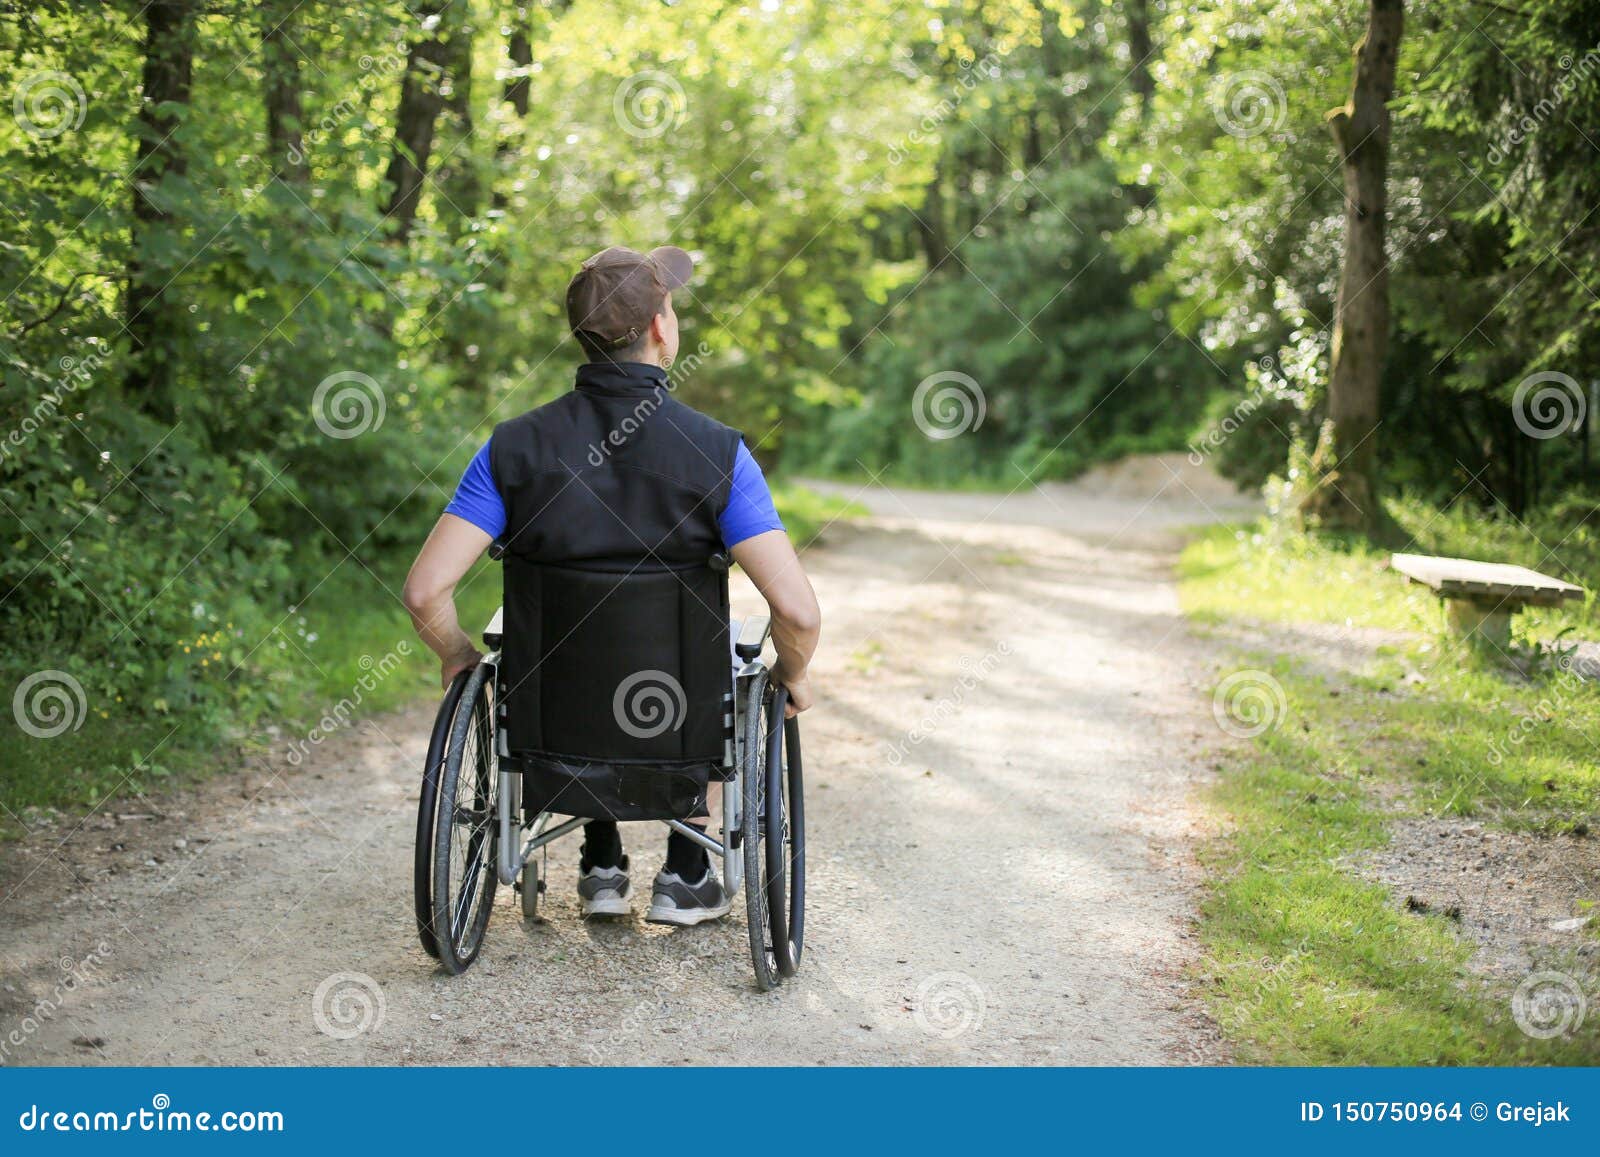 Disabled on in Nature Stock Photo - Image of independence, medicine: